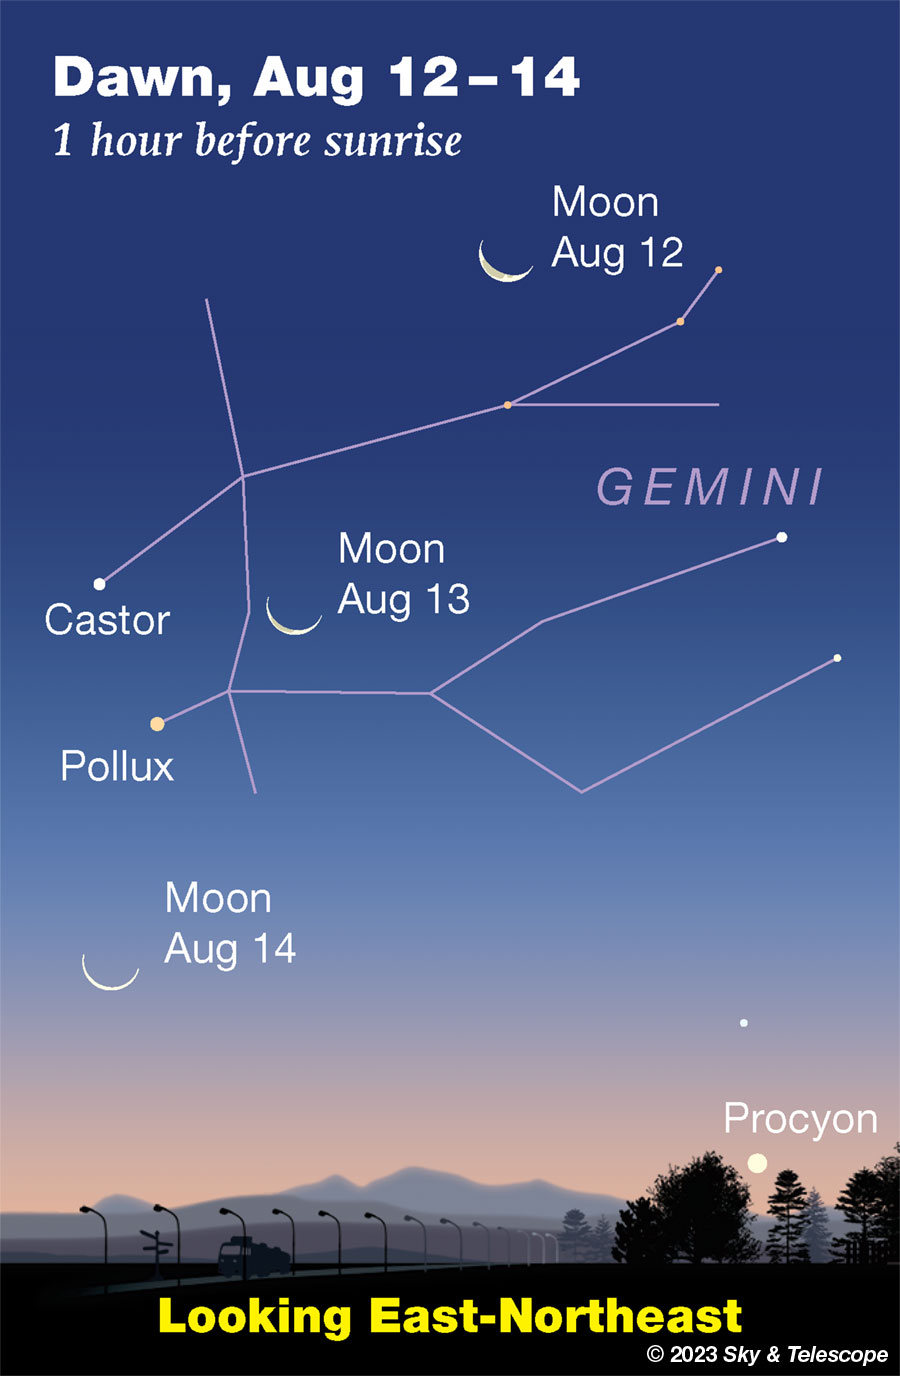 Waning crescent Moon passing Castor and Pollux at dawn, Aug 12-14, 2023